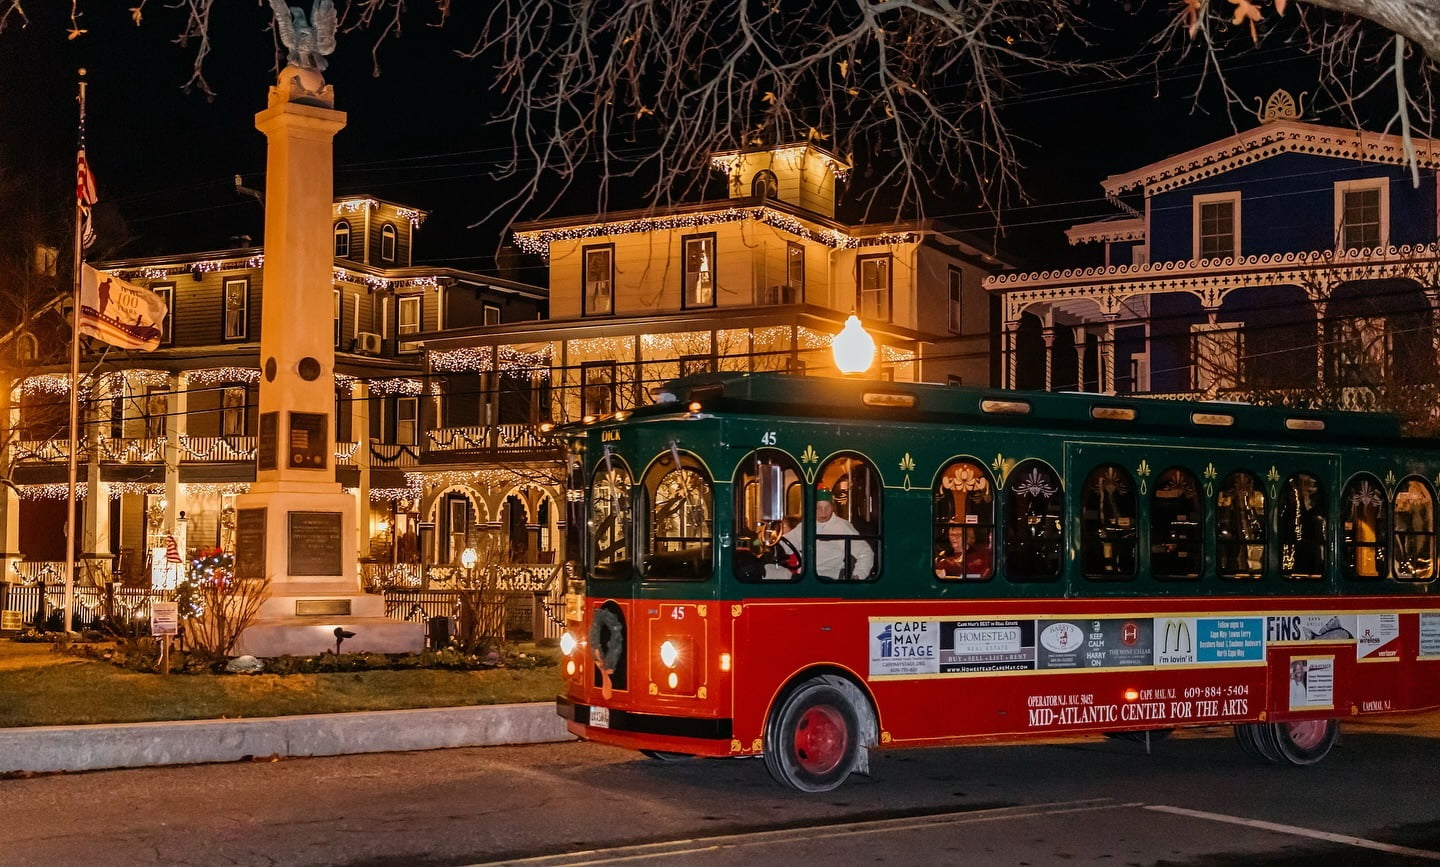 Book a beautiful Christmas tour through the heart of Cape May and take in the exquisite holiday lights and elegant Victorian architecture at CapeMayMacorg during your next visit to The Ashley Rose Tours continue through January 1st